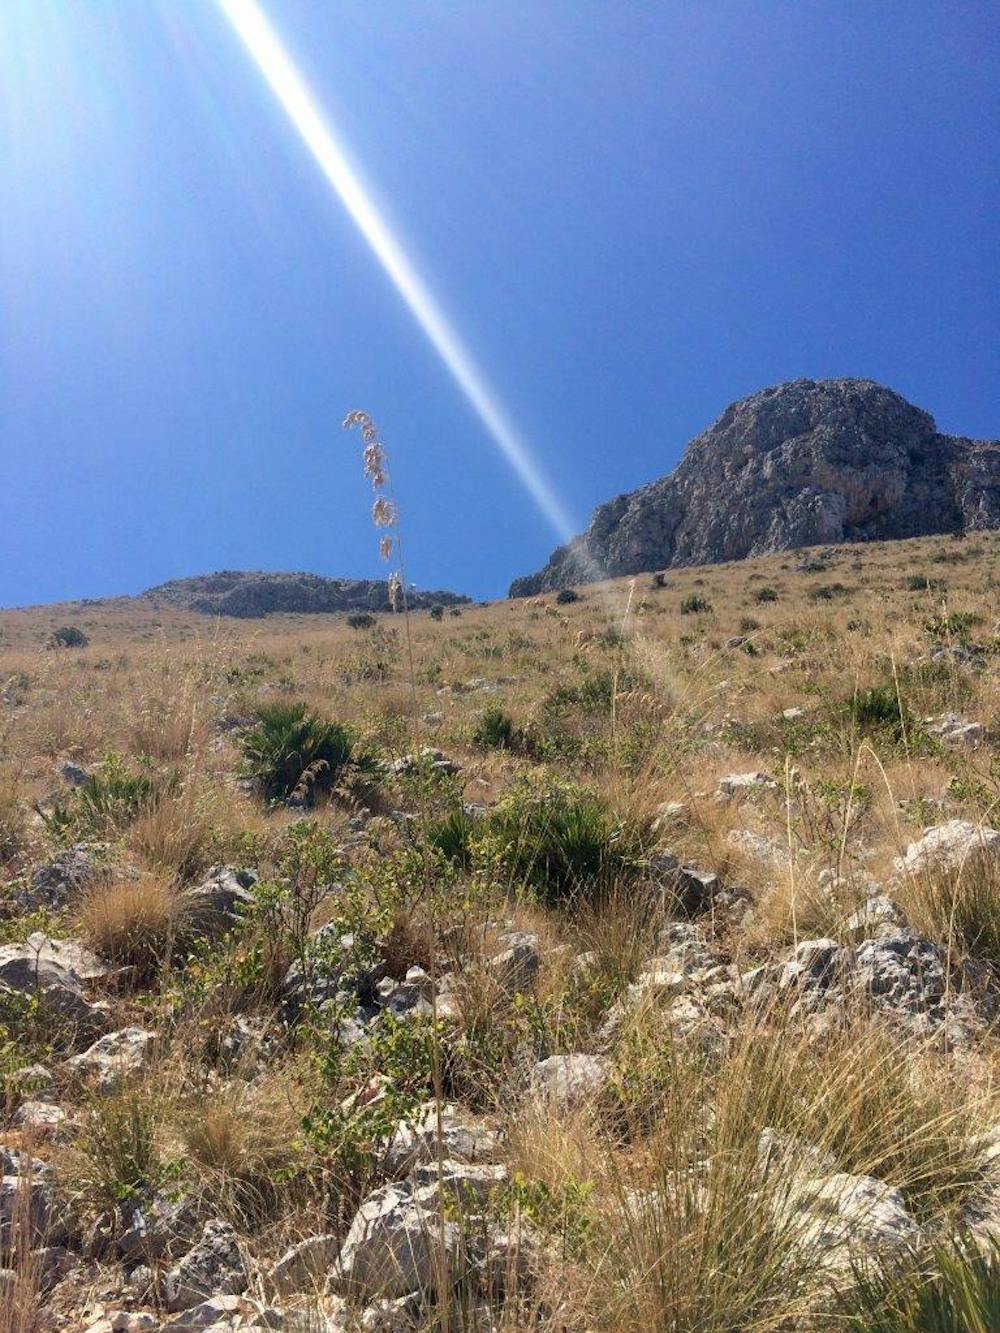 Photo from The 5 Peaks of San Vito